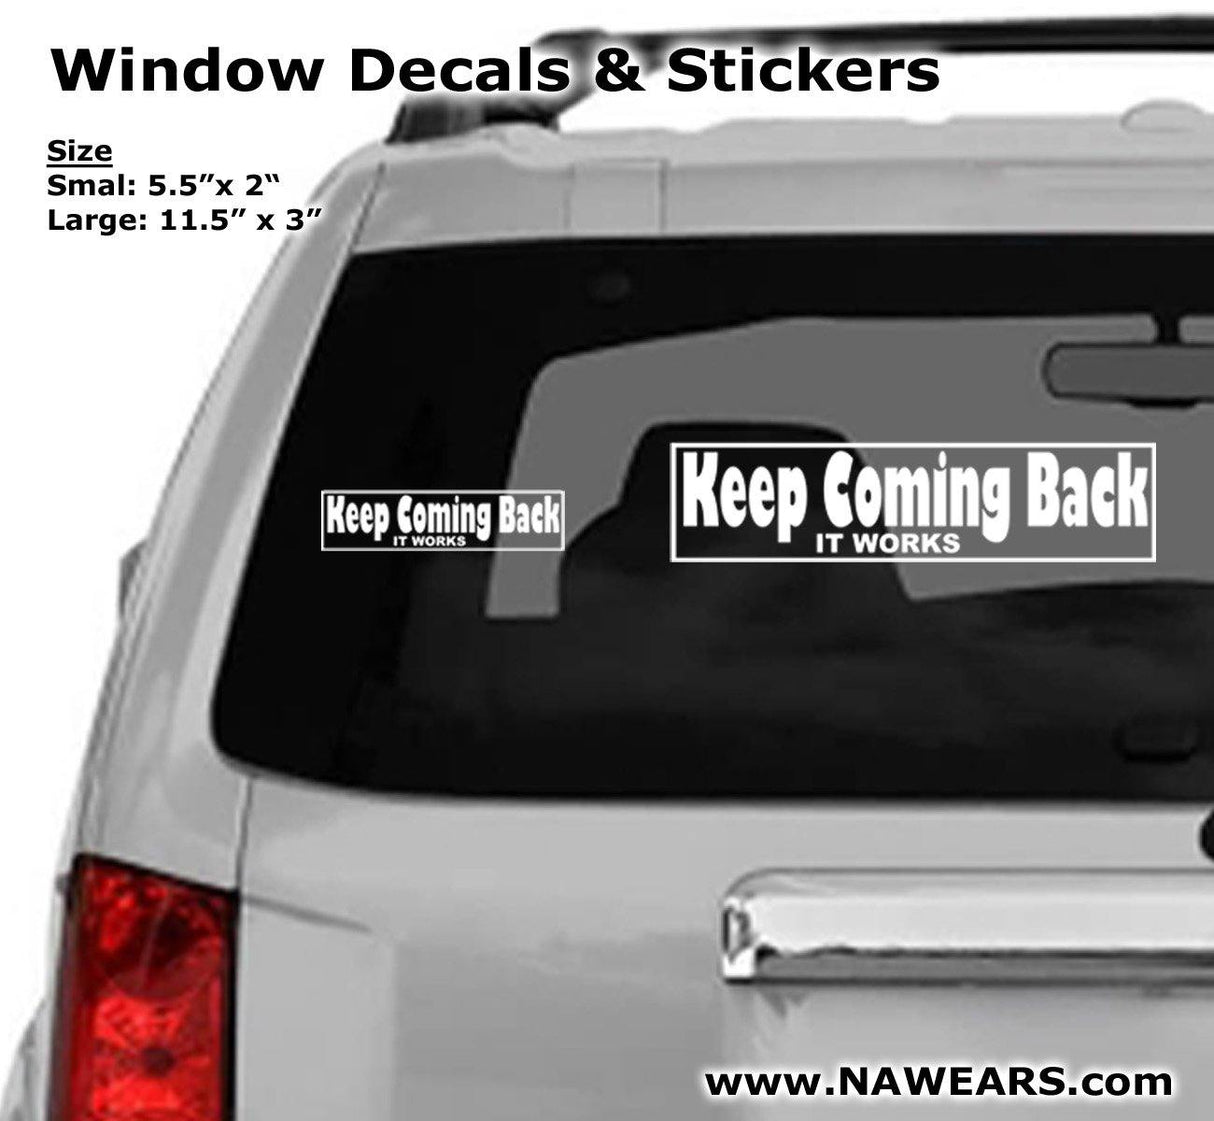 Win Decal - Keep Coming Back Decals - nawears